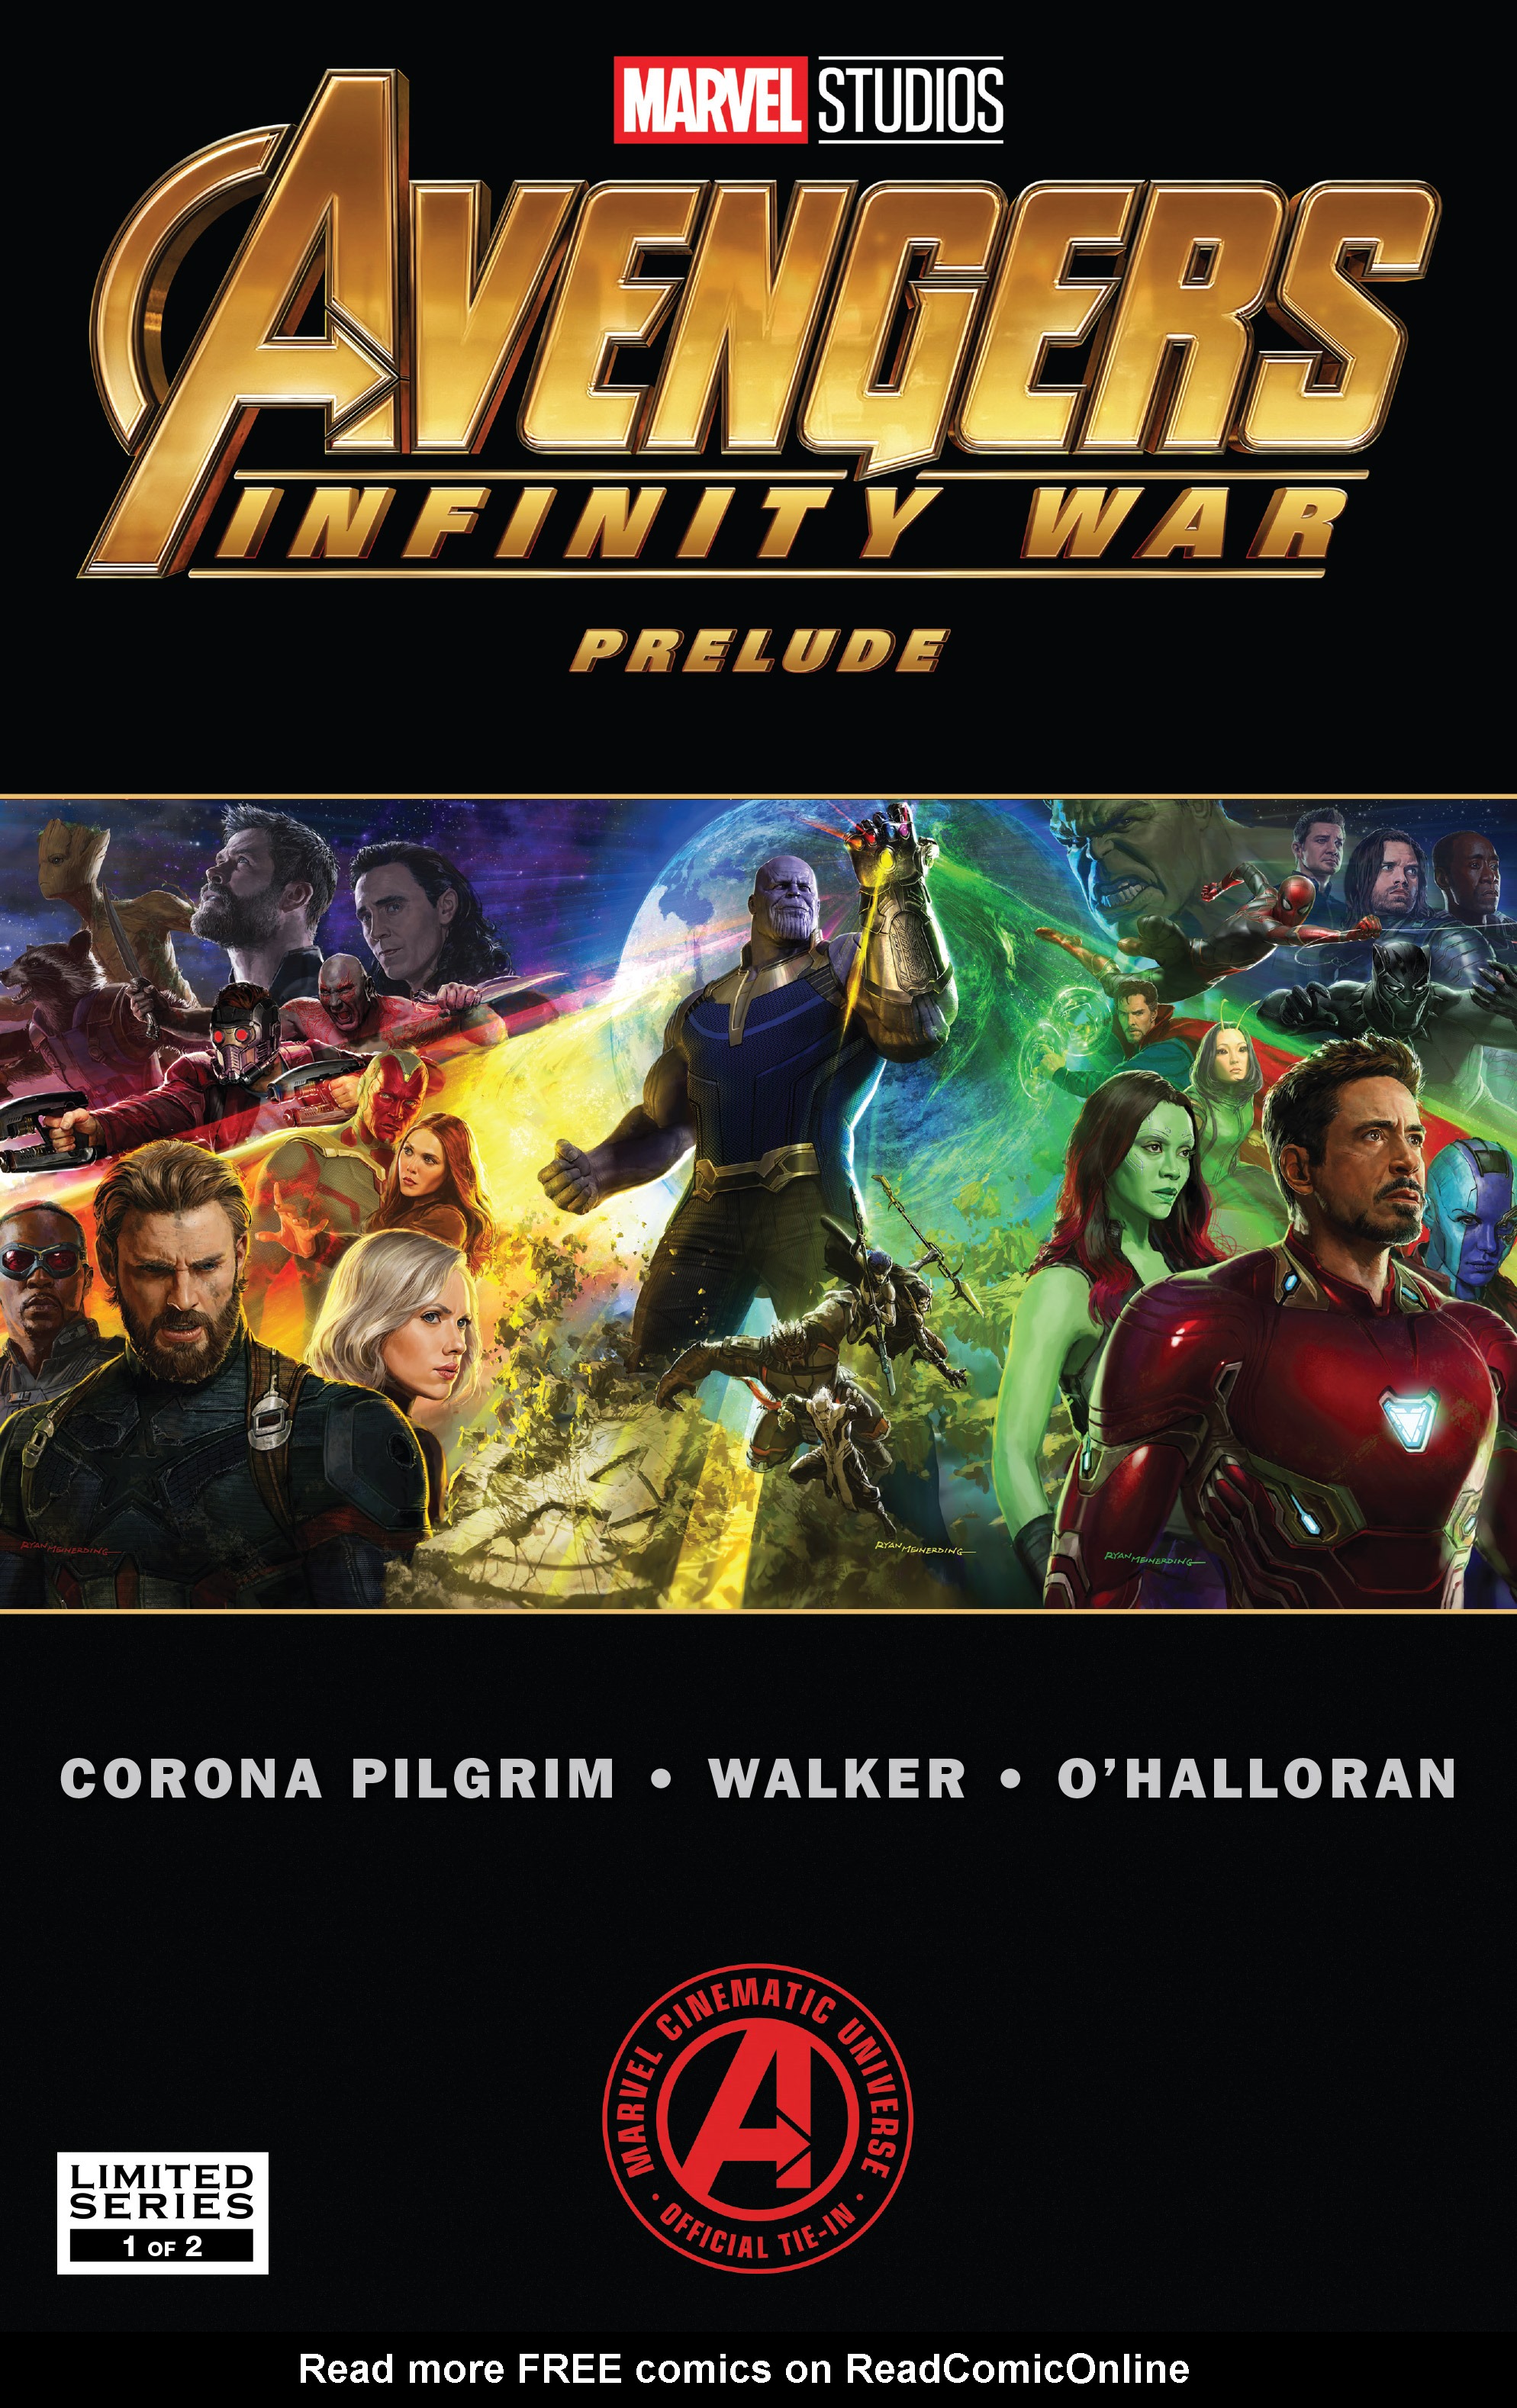 Avengers Infinity War Porn - Avengers Infinity War Prelude Issue 1 | Read Avengers Infinity War Prelude  Issue 1 comic online in high quality. Read Full Comic online for free -  Read comics online in high quality .|viewcomiconline.com